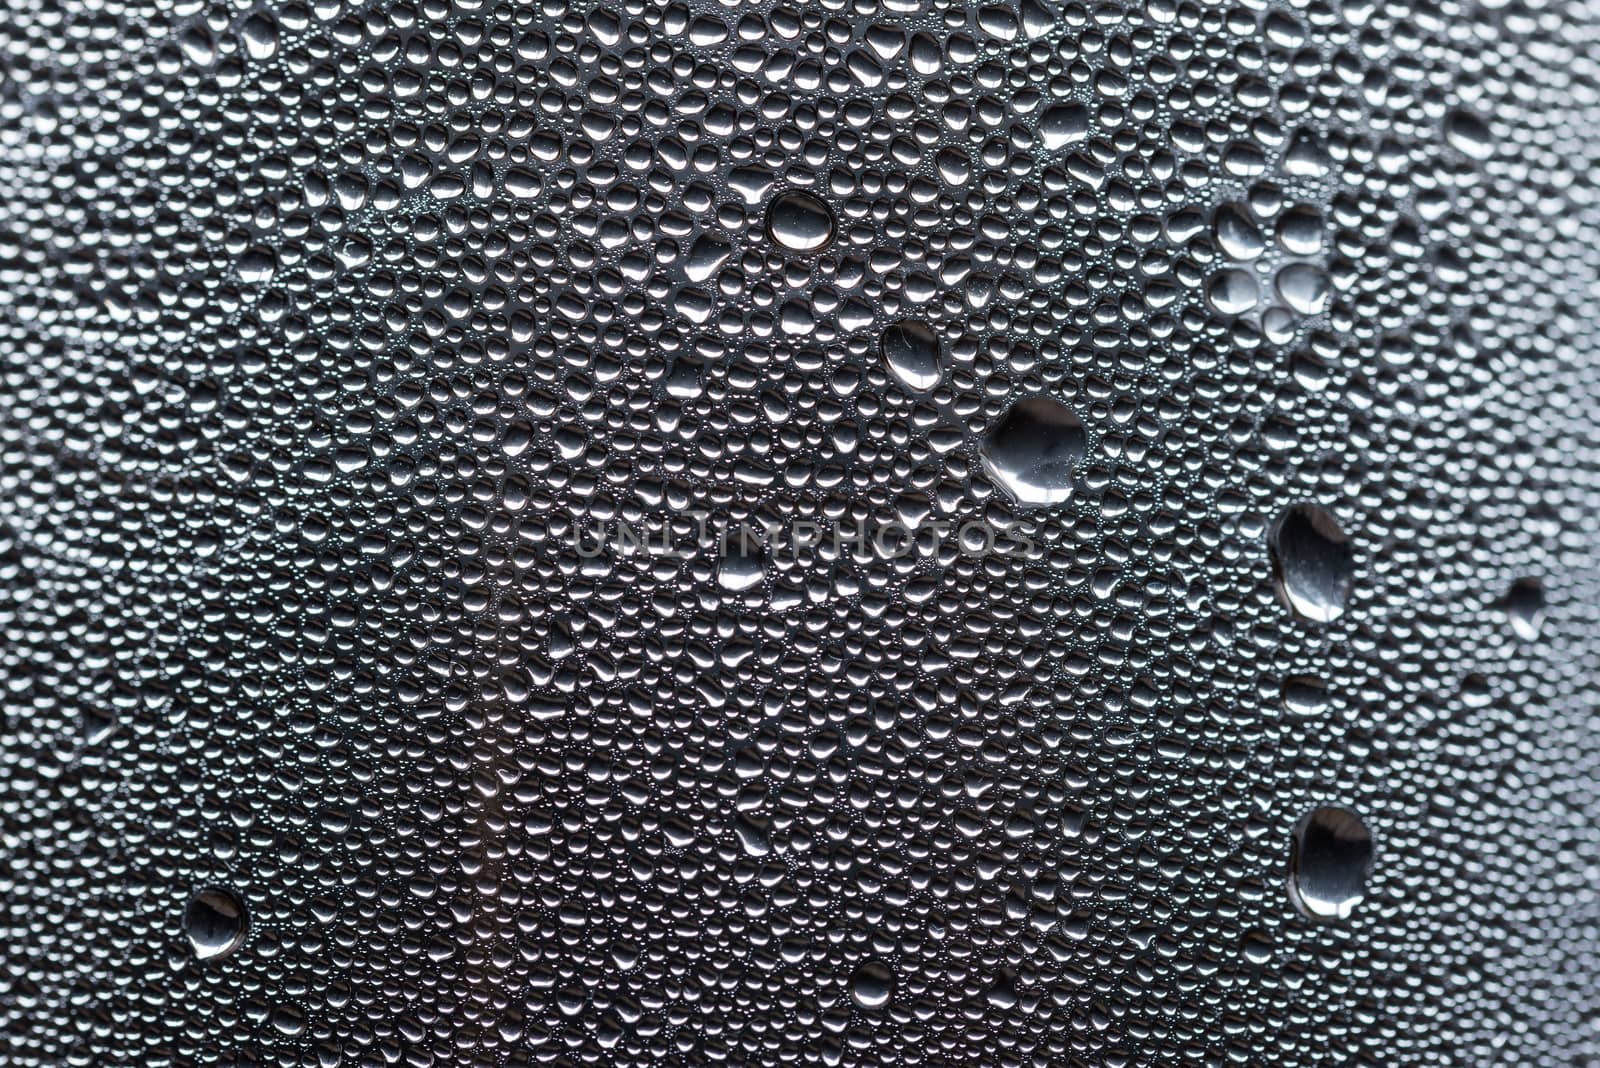 Many little water drops due to condensation on a plastic bottle curved surface